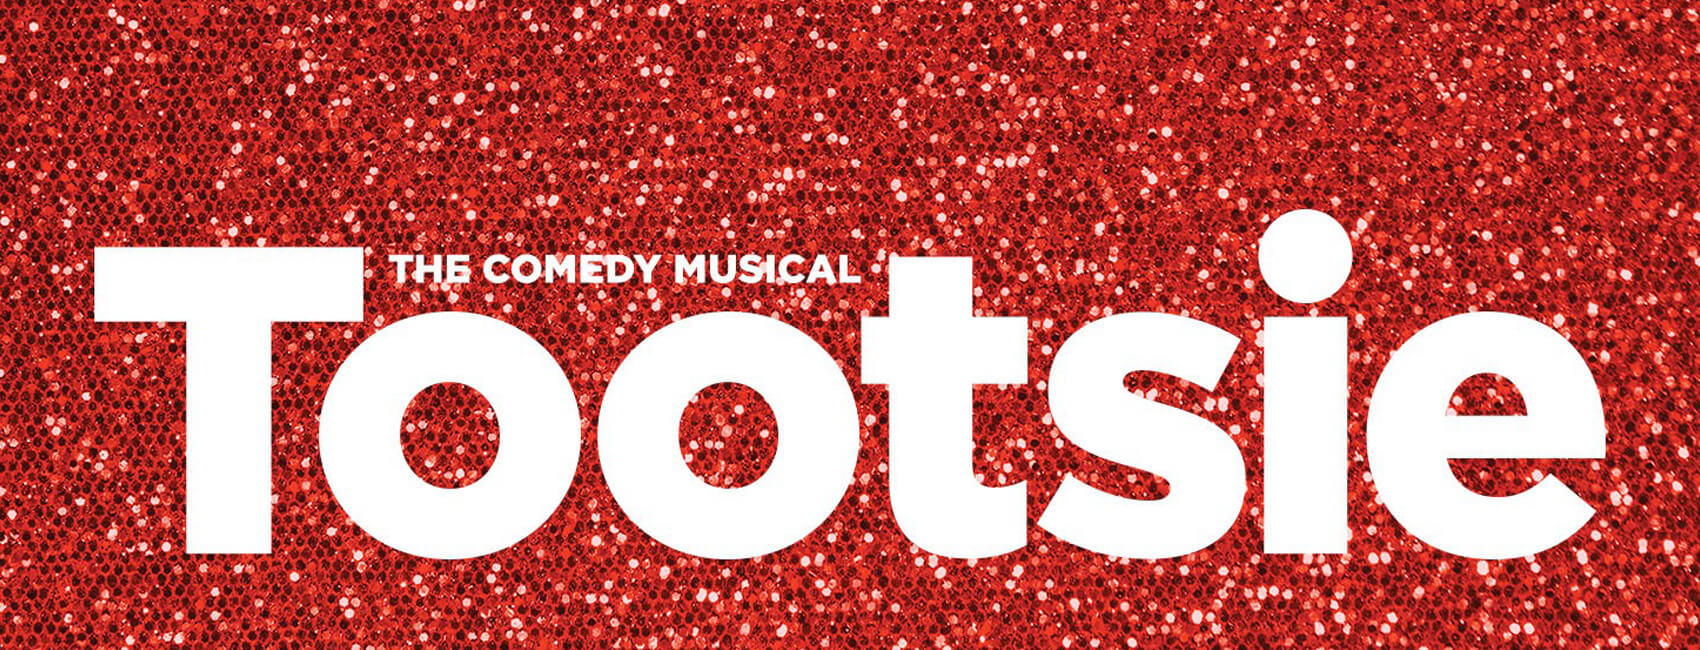 Tootsie, The Comedy Musical